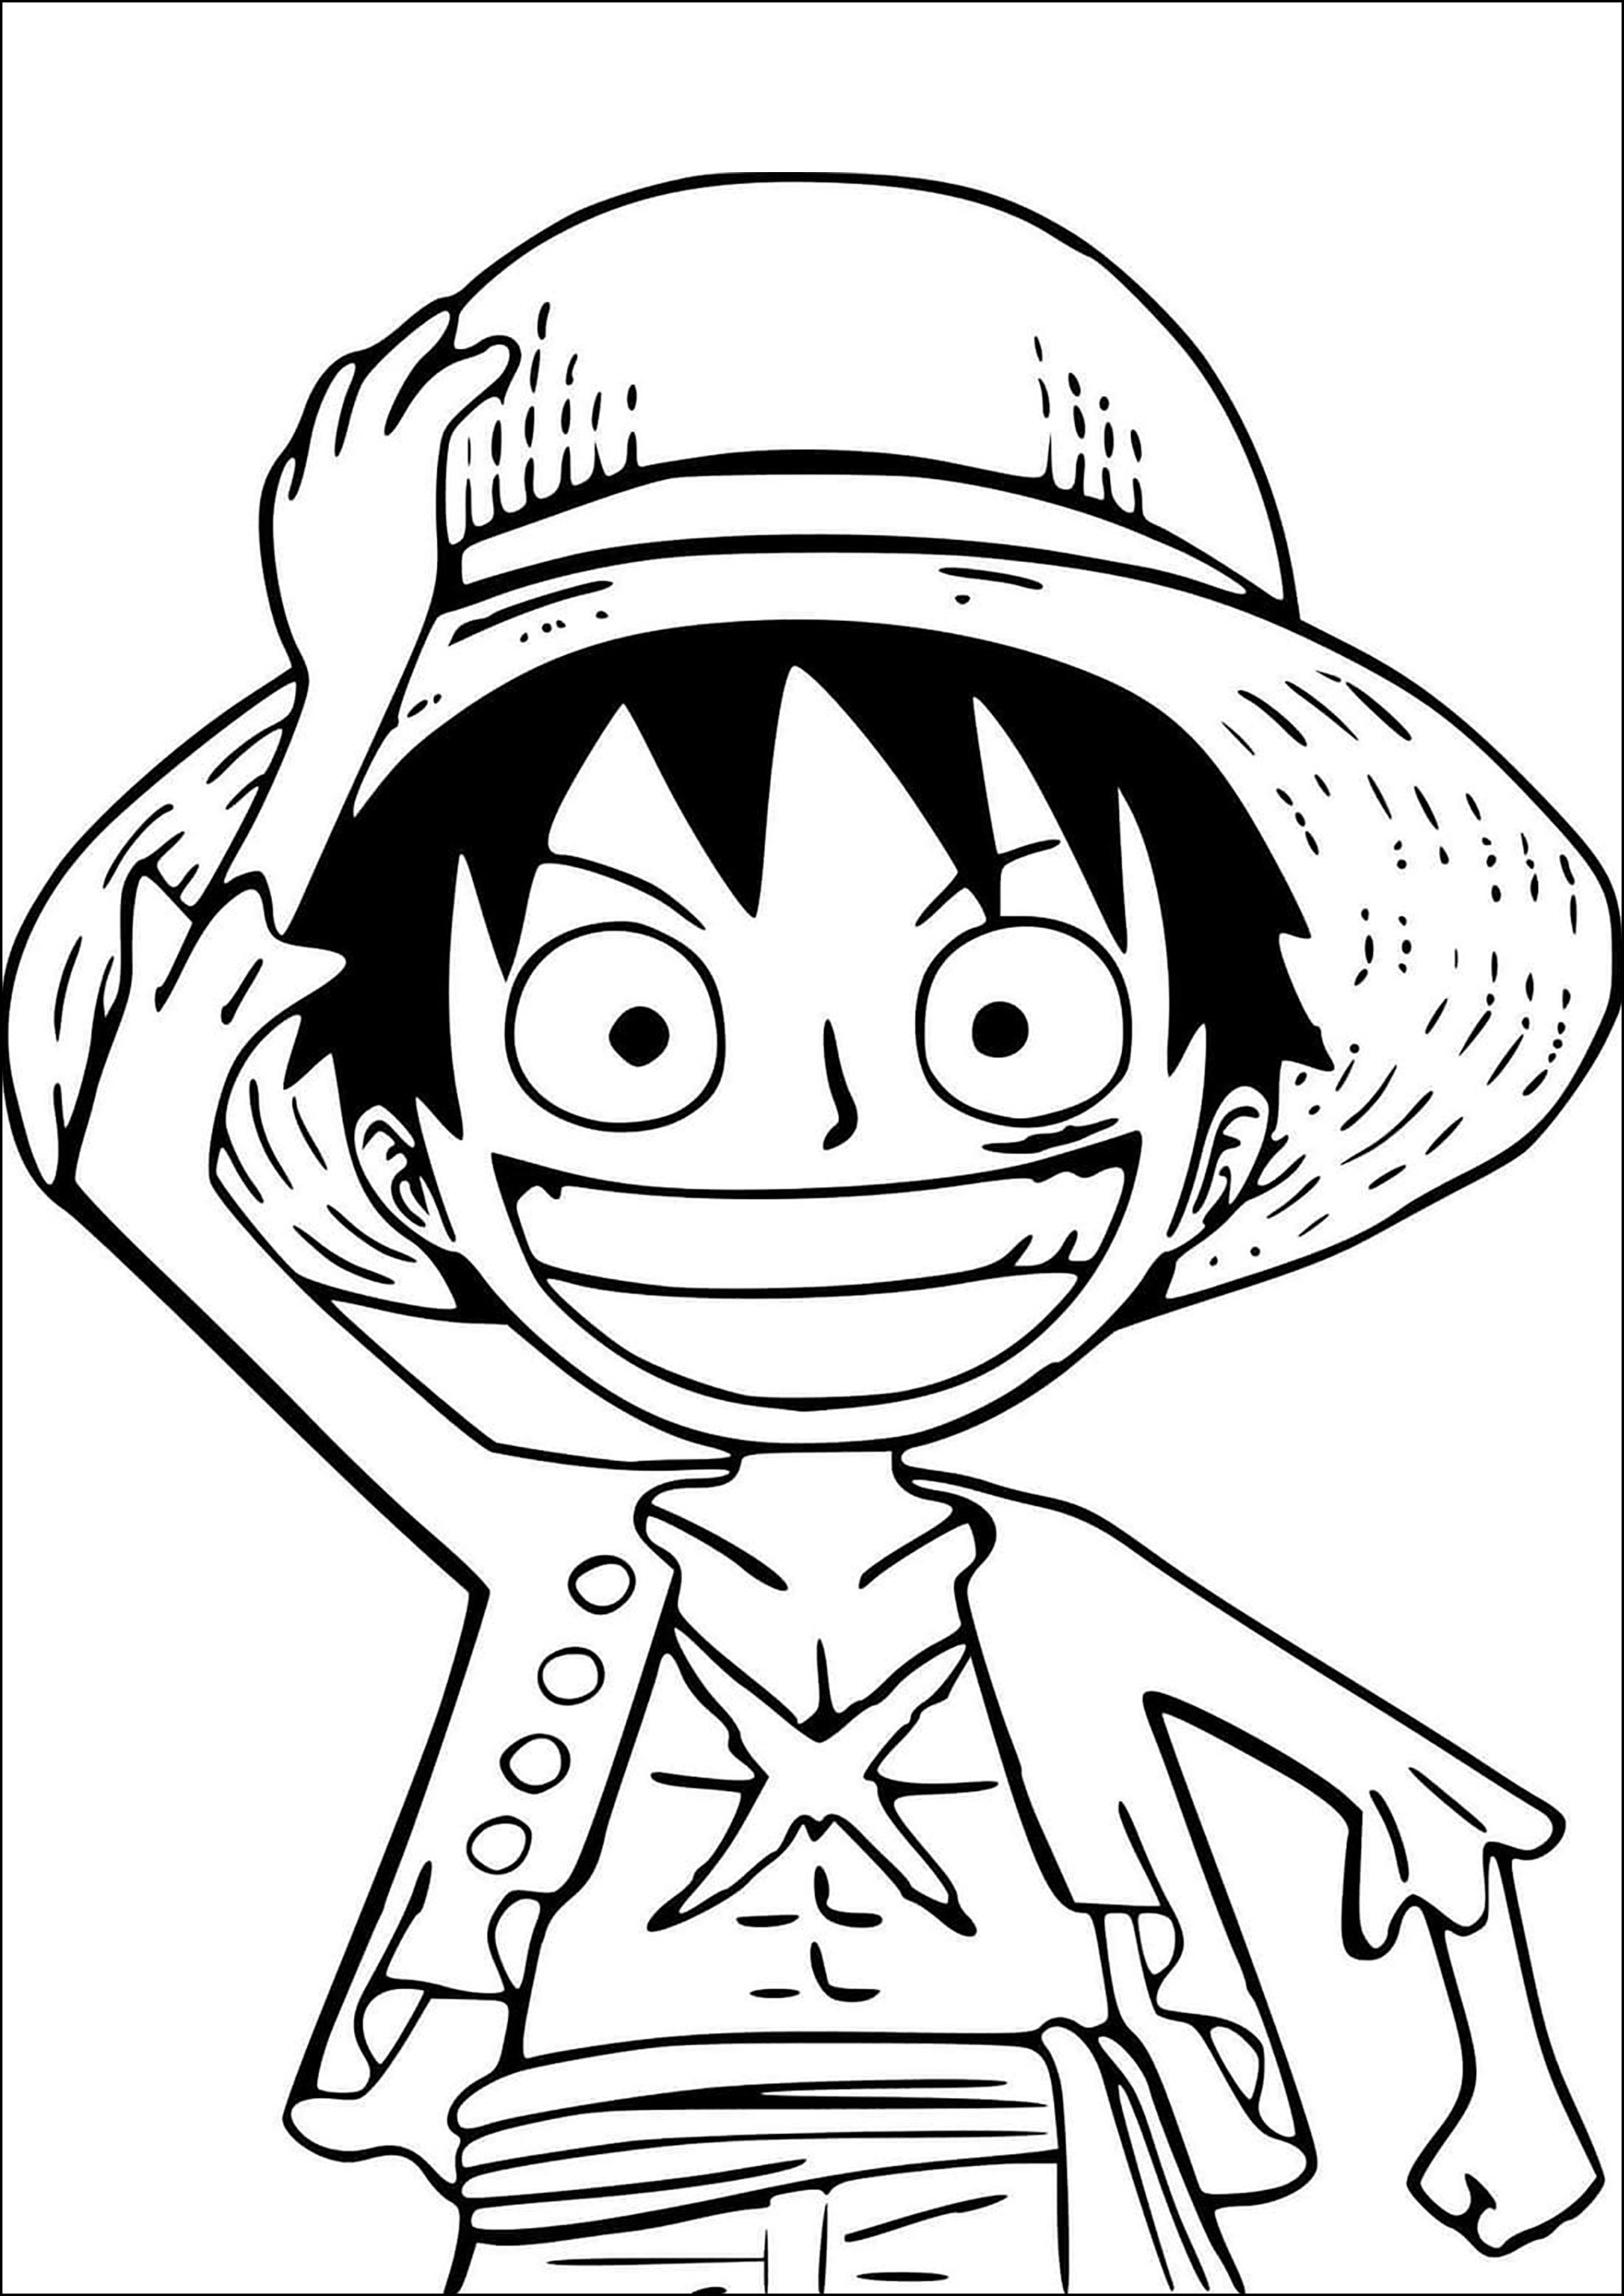 How to Draw Monkey D. Luffy's Face: A Step-by-Step Guide